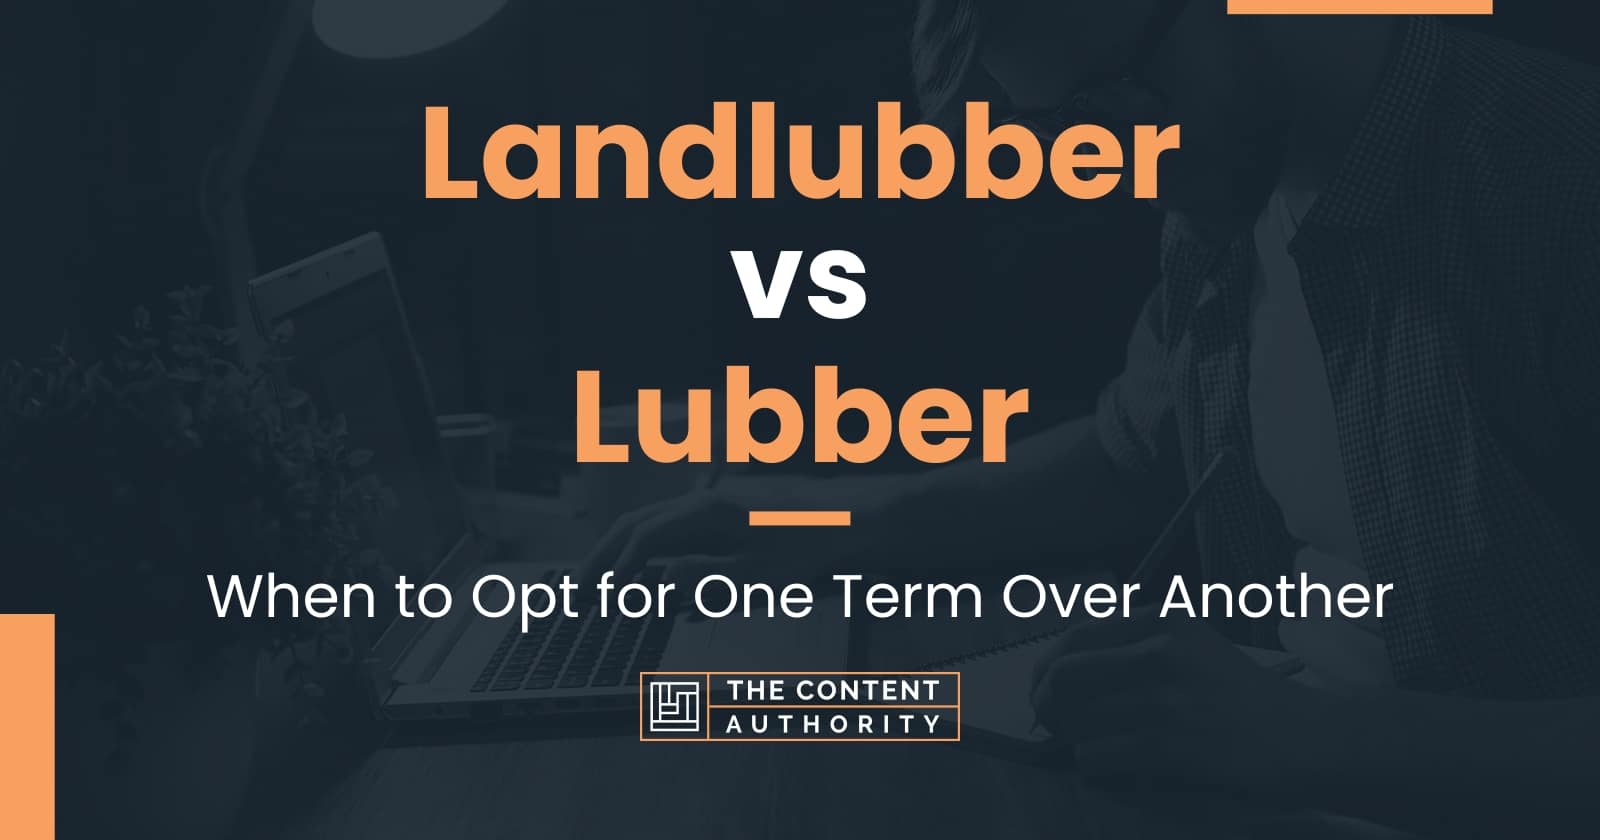 Landlubber vs Lubber: When to Opt for One Term Over Another